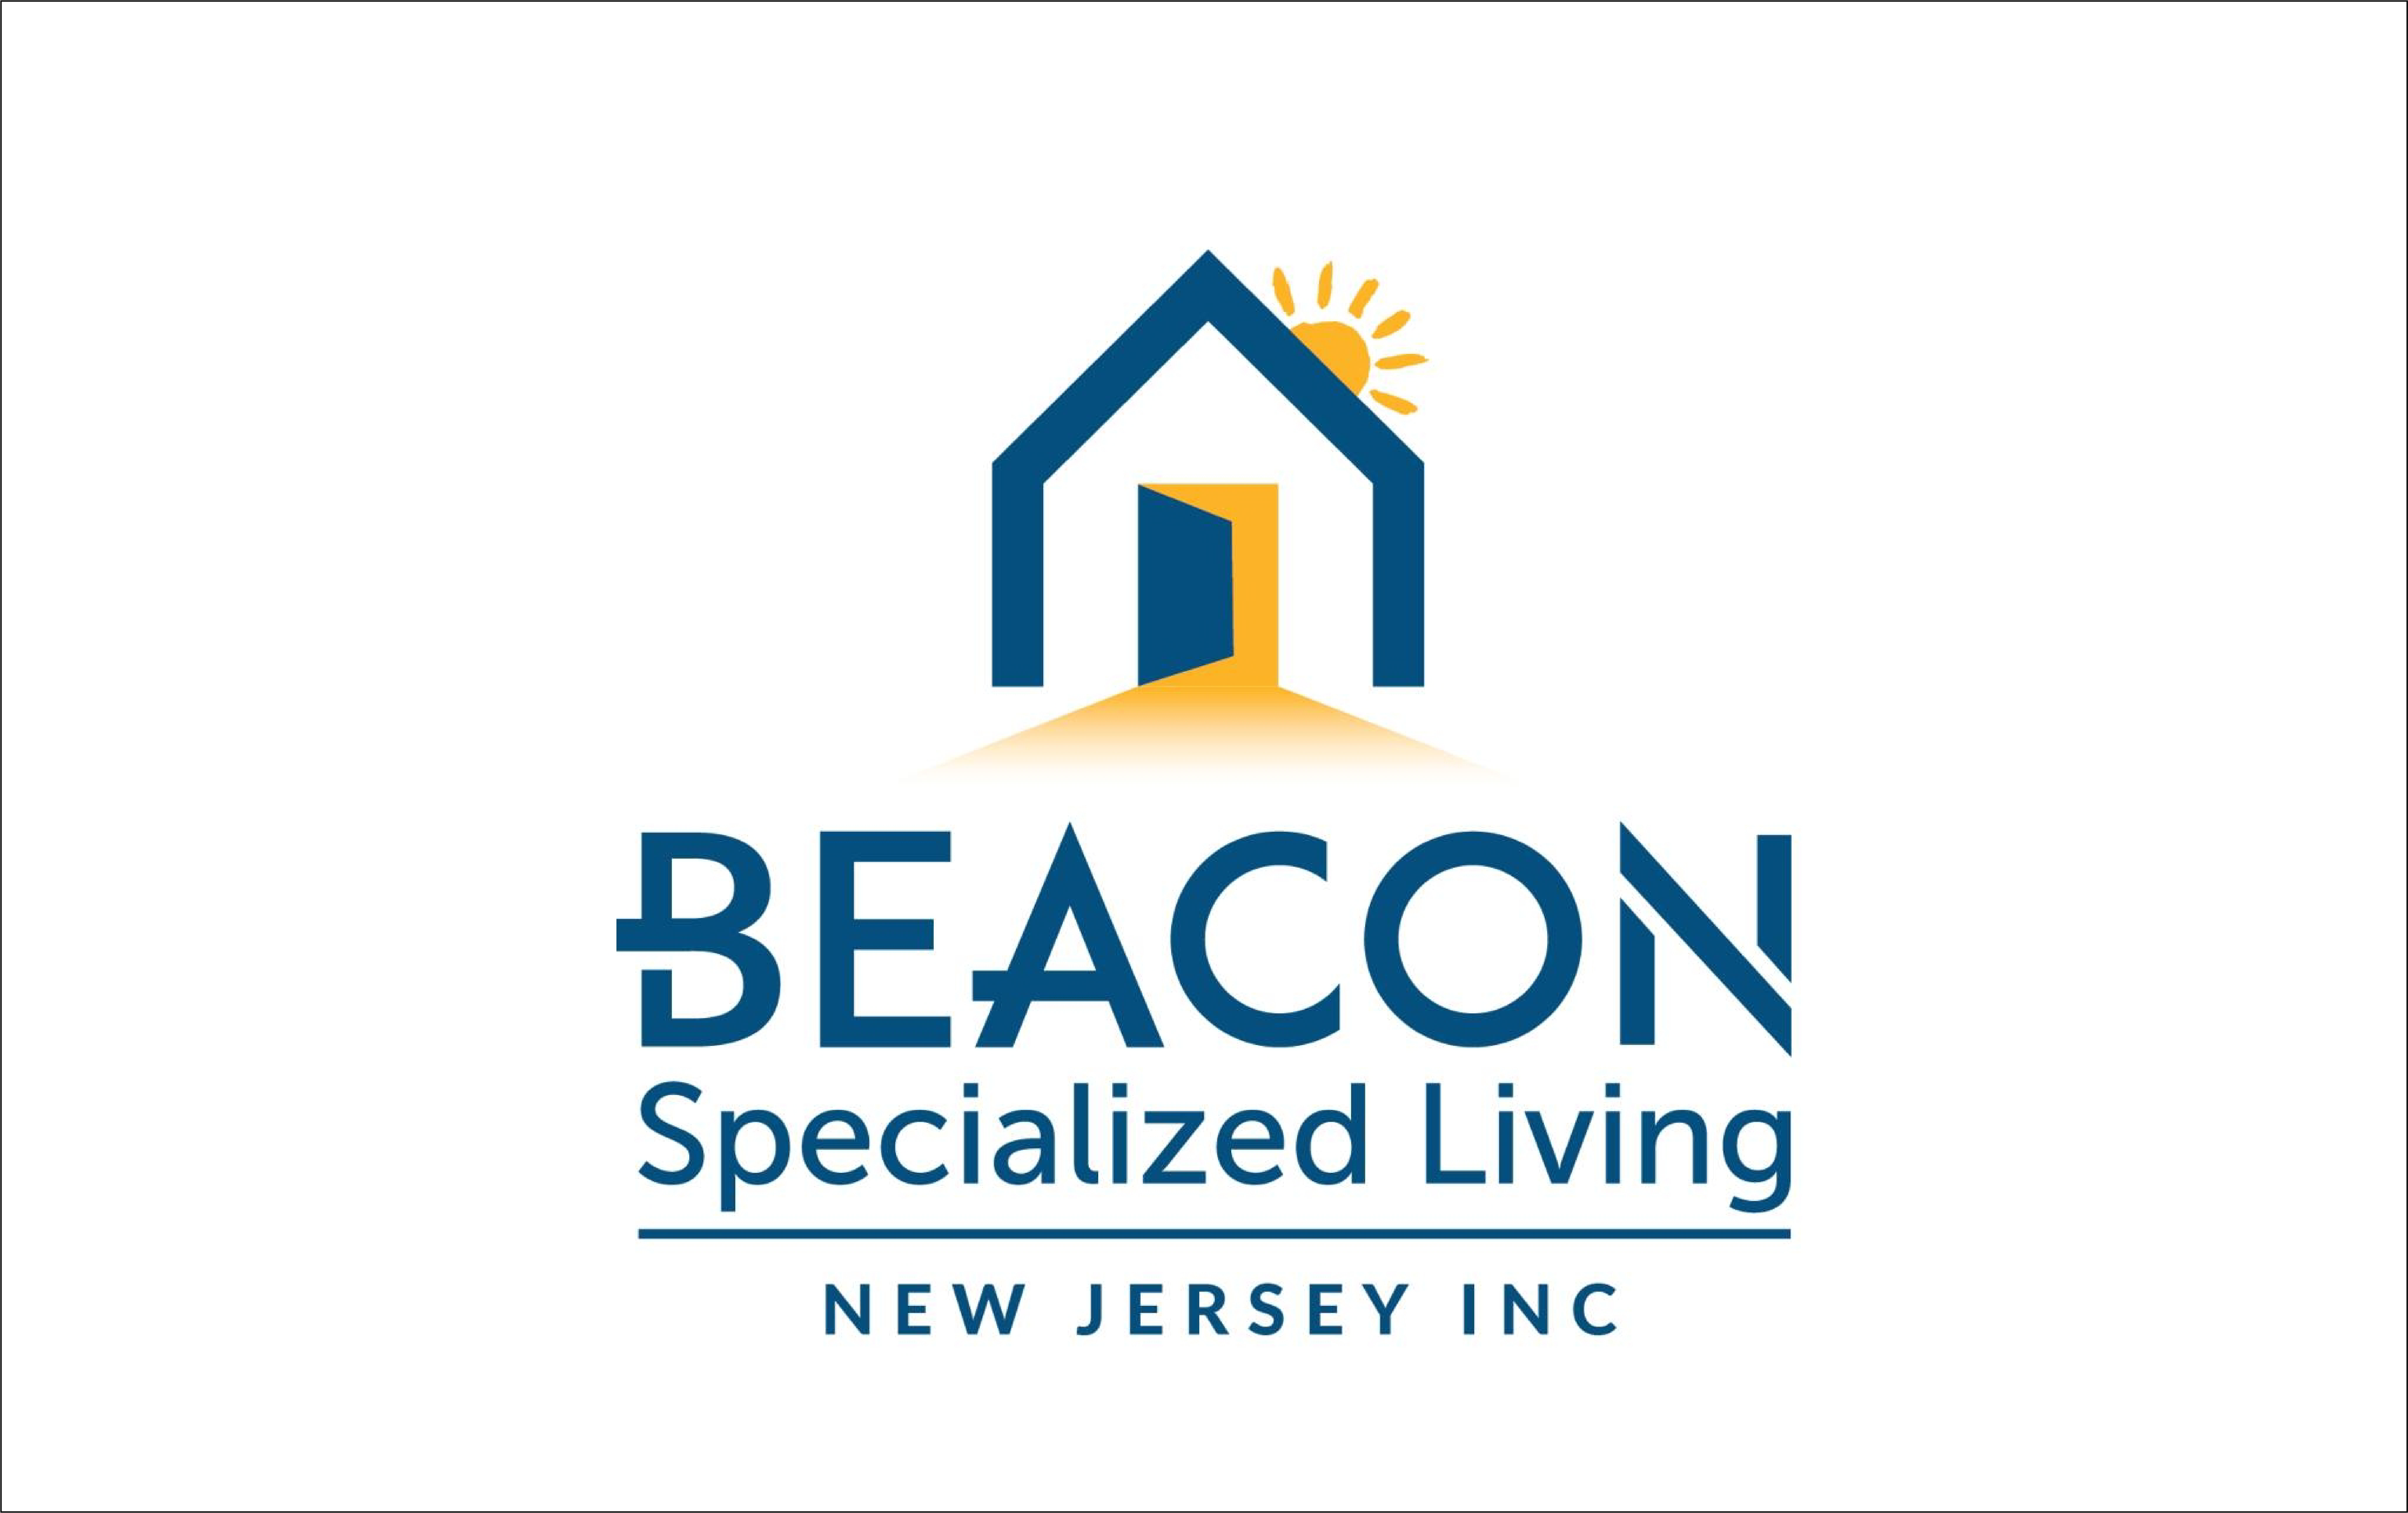 Enable Inc. Logo - Beacon Specialized Living